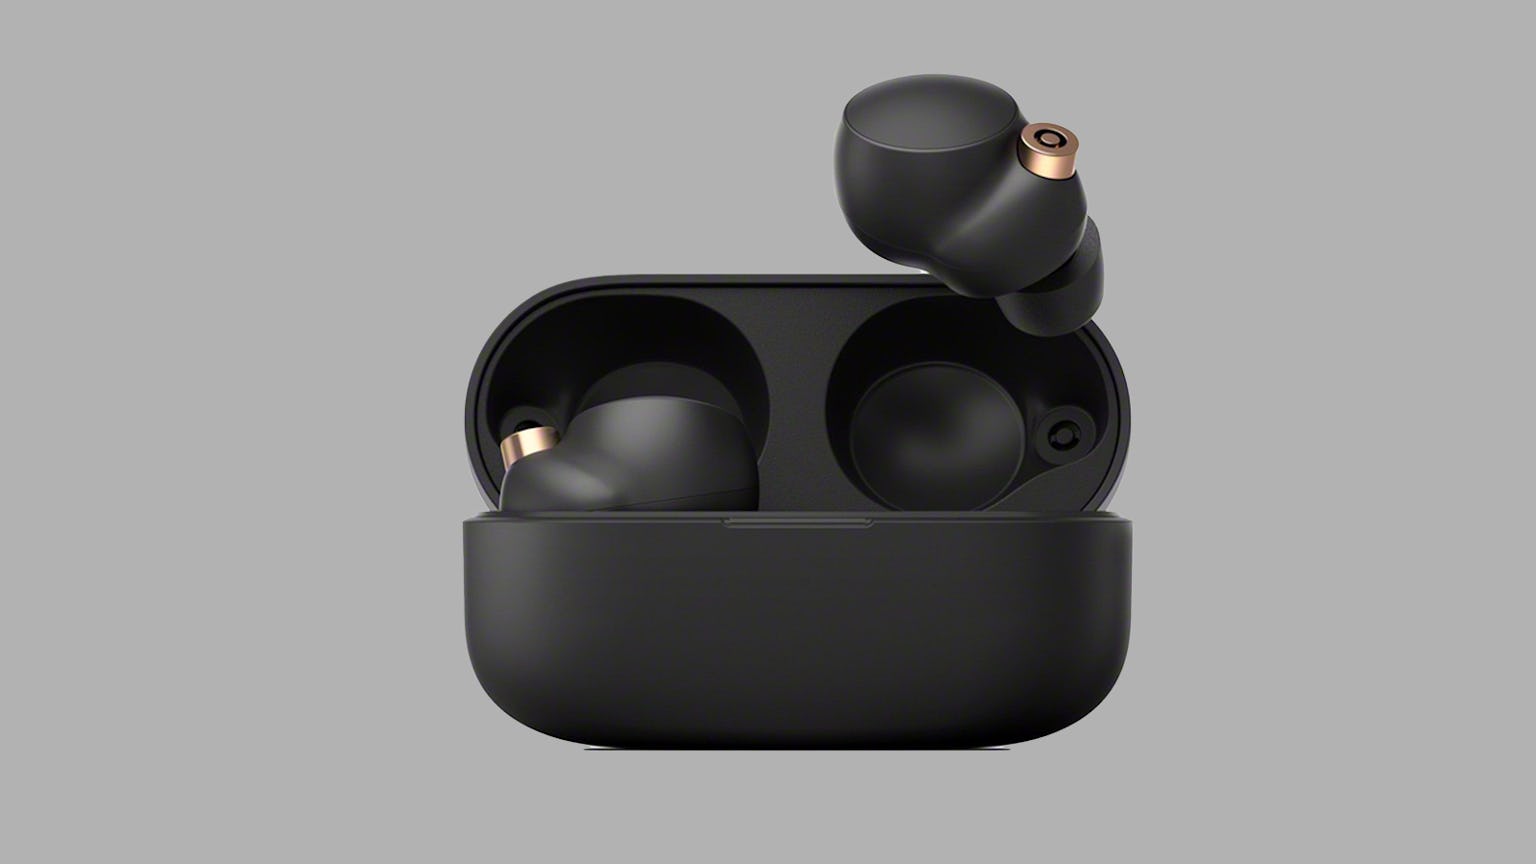 The absolute best wireless earbuds for Android devices